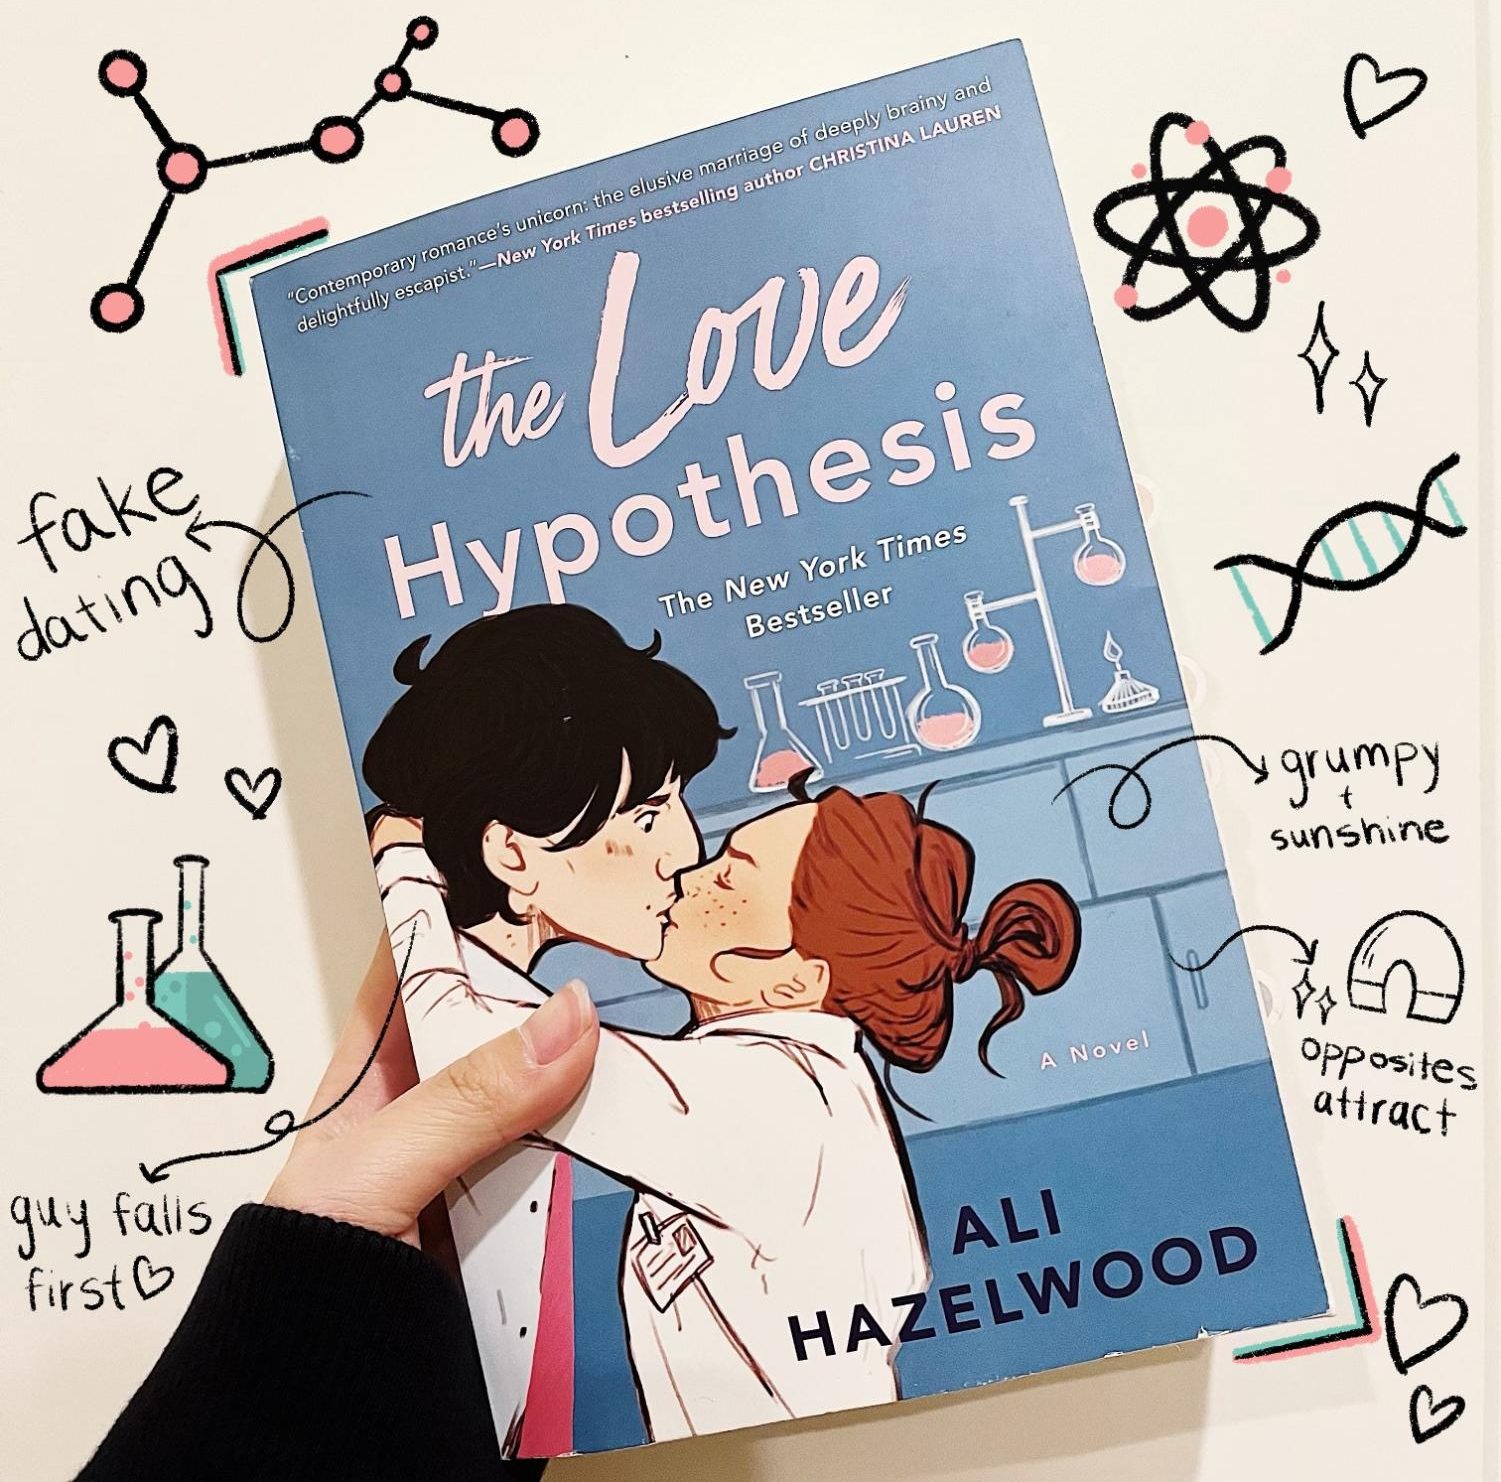 what's love hypothesis about